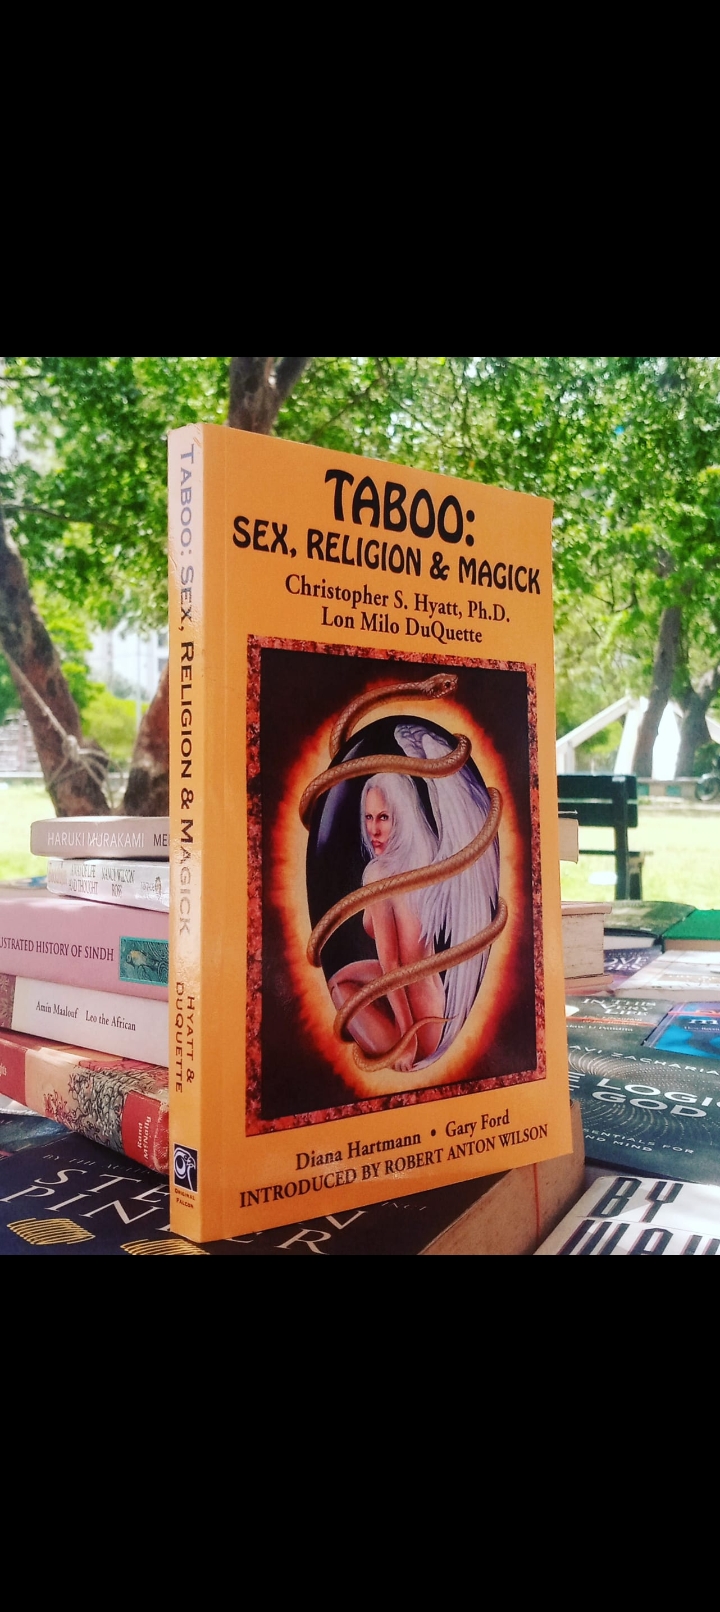 taboo: sex, religion & magick by christopher s. hyatt. new original paperback rs.2500 delivery free 